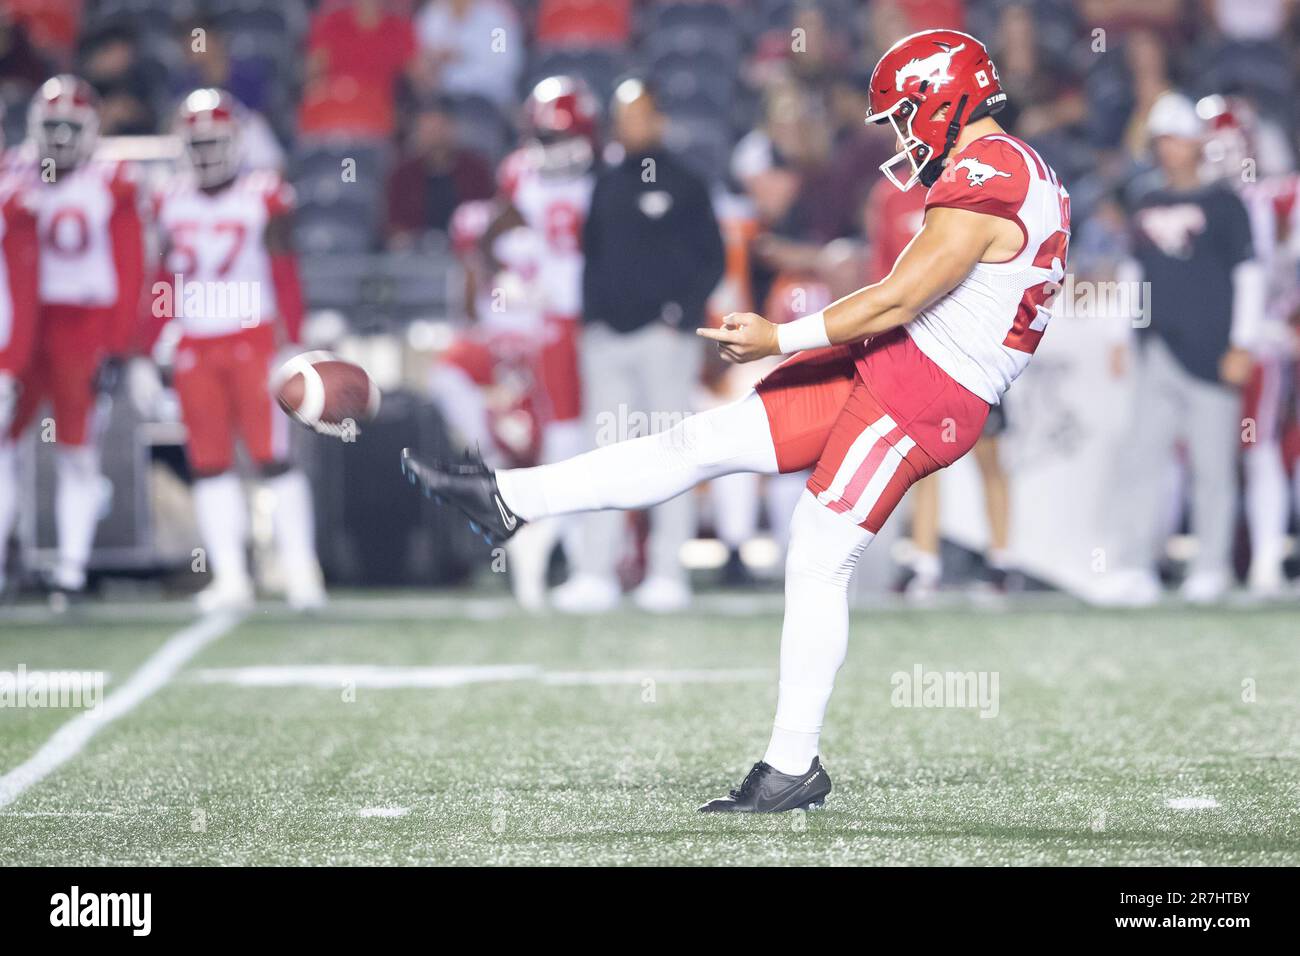 Ottawa, Canada. 15th June, 2023. Calgary Stampeders punter Cody Grace (24) boots a kick during the CFL game between Calgary Stampeders and Ottawa Redblacks held at TD Place Stadium in Ottawa, Canada. Daniel Lea/CSM/Alamy Live News Stock Photo